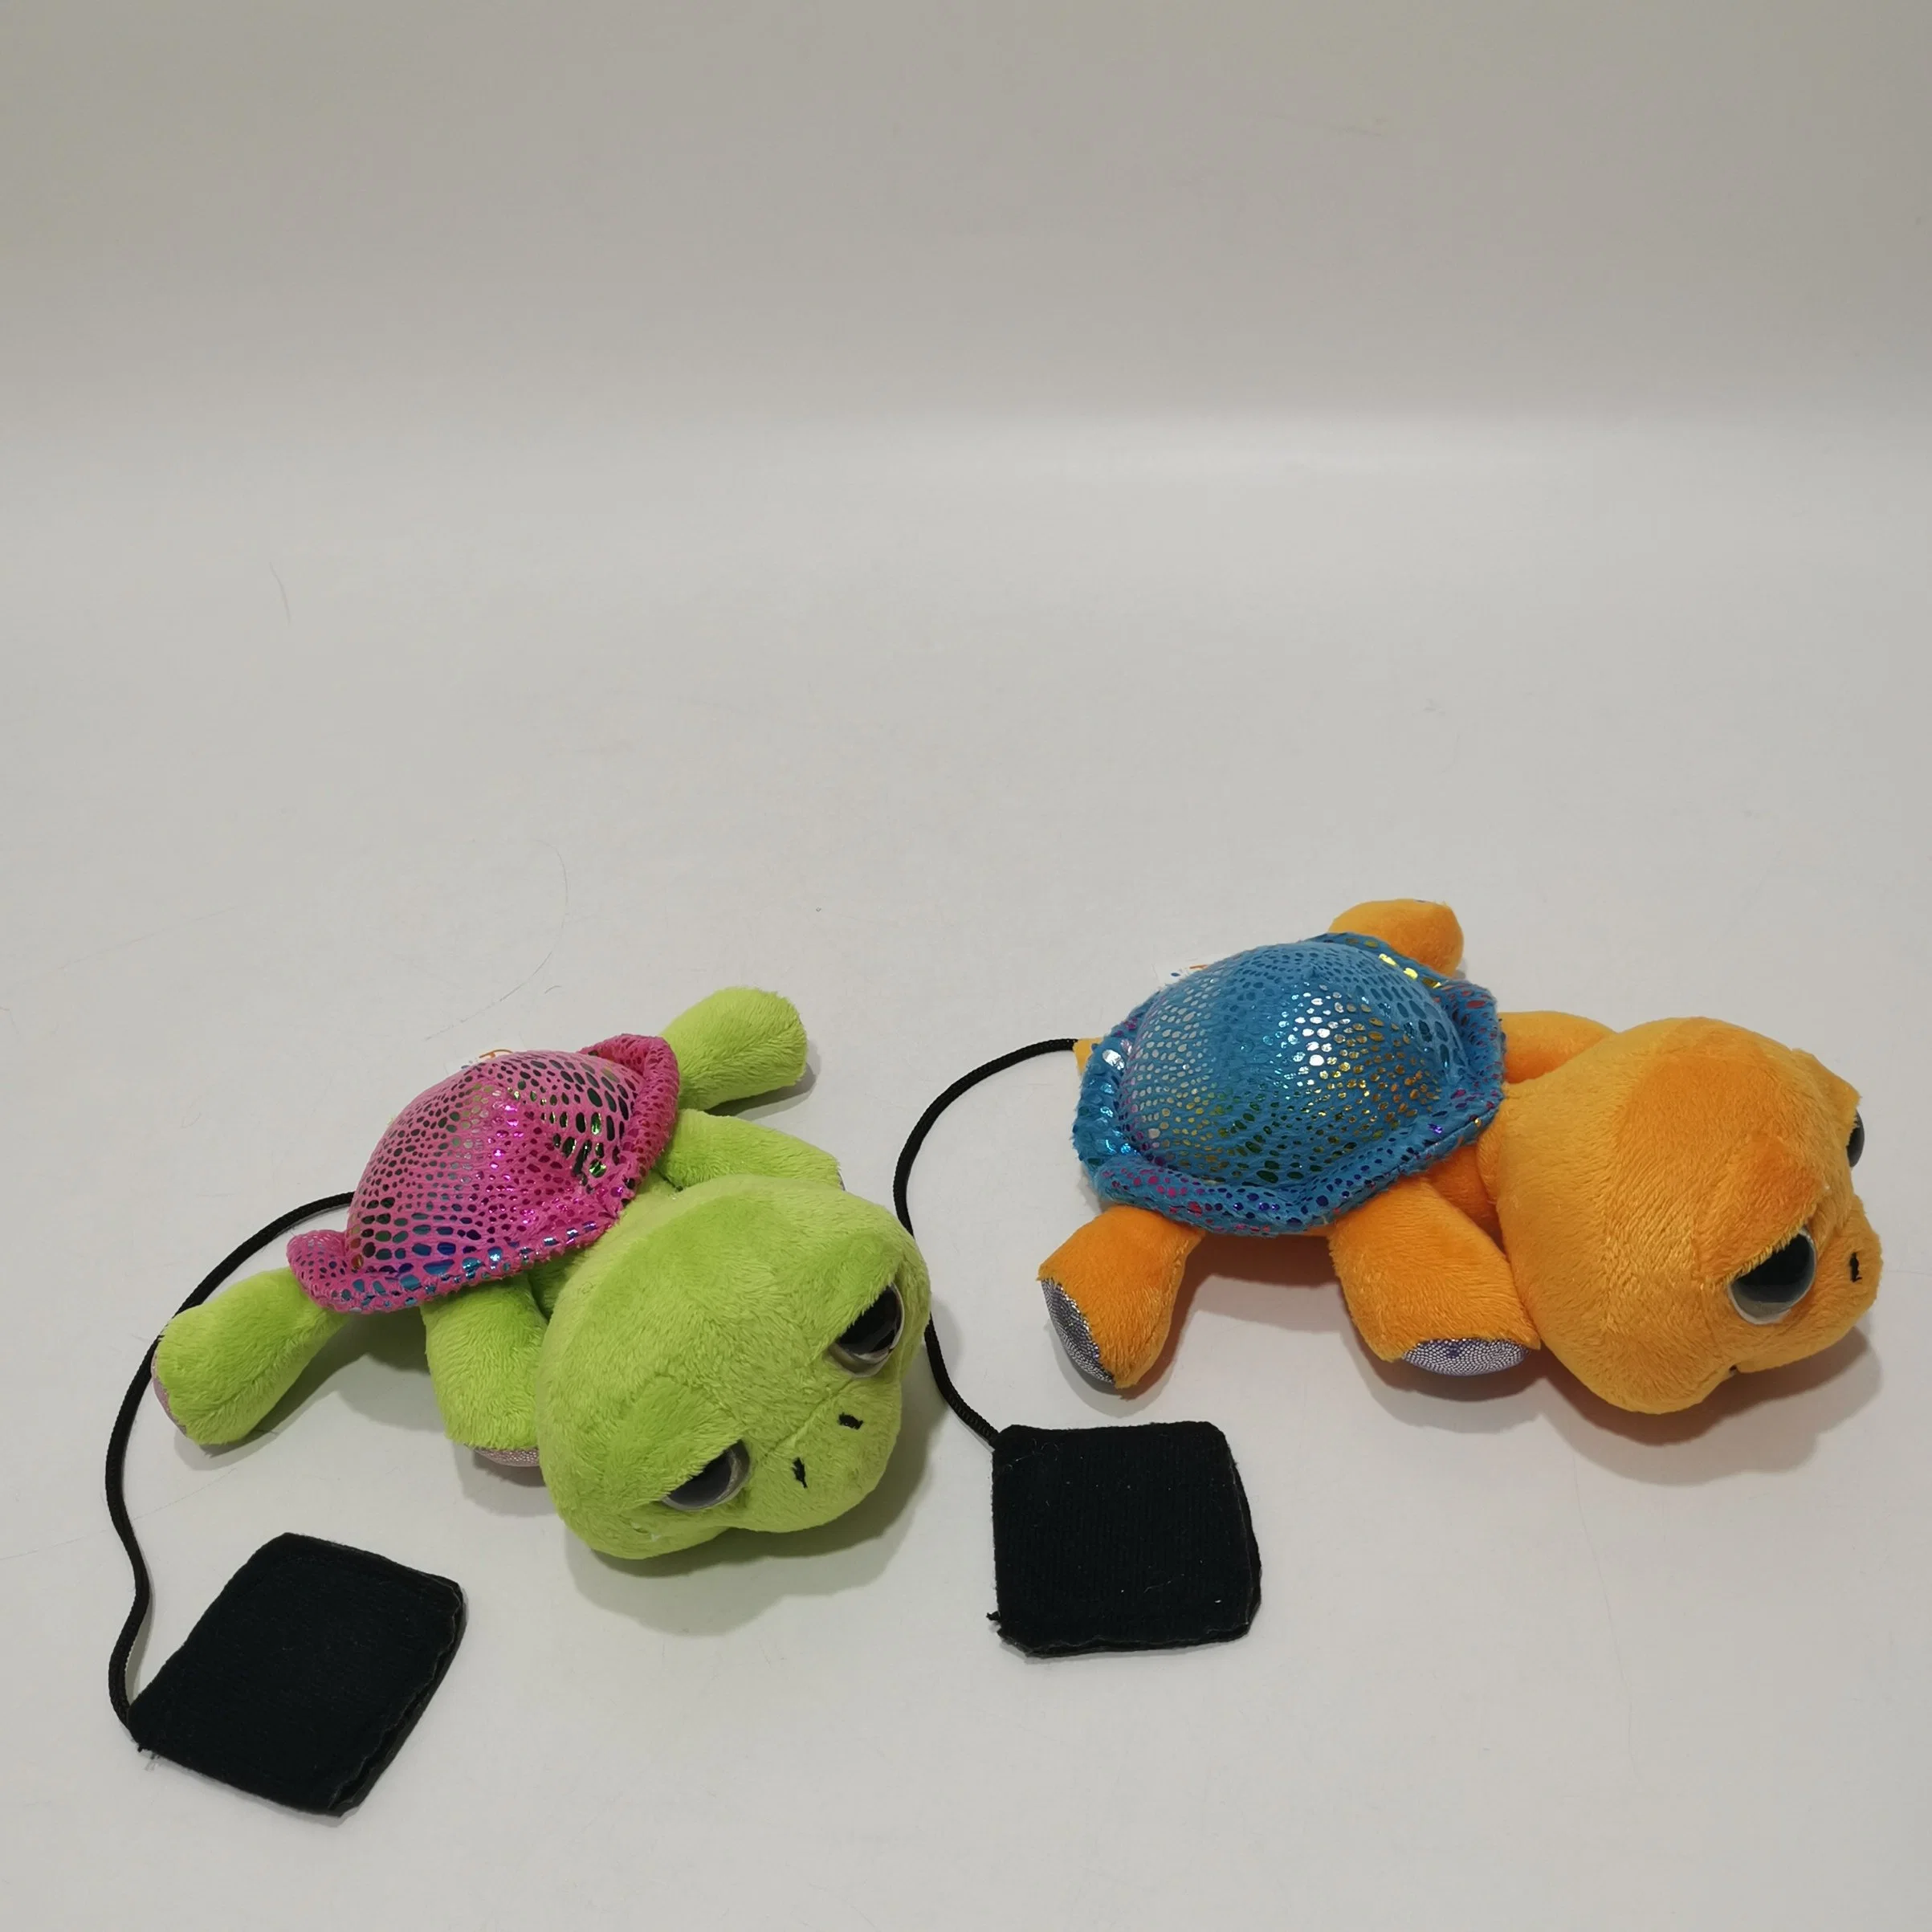 2022 OEM 2 Clrs Plush Tortoises with Magnet Toys Stuffed Novelty Toys for Kids Education & Stress Relief